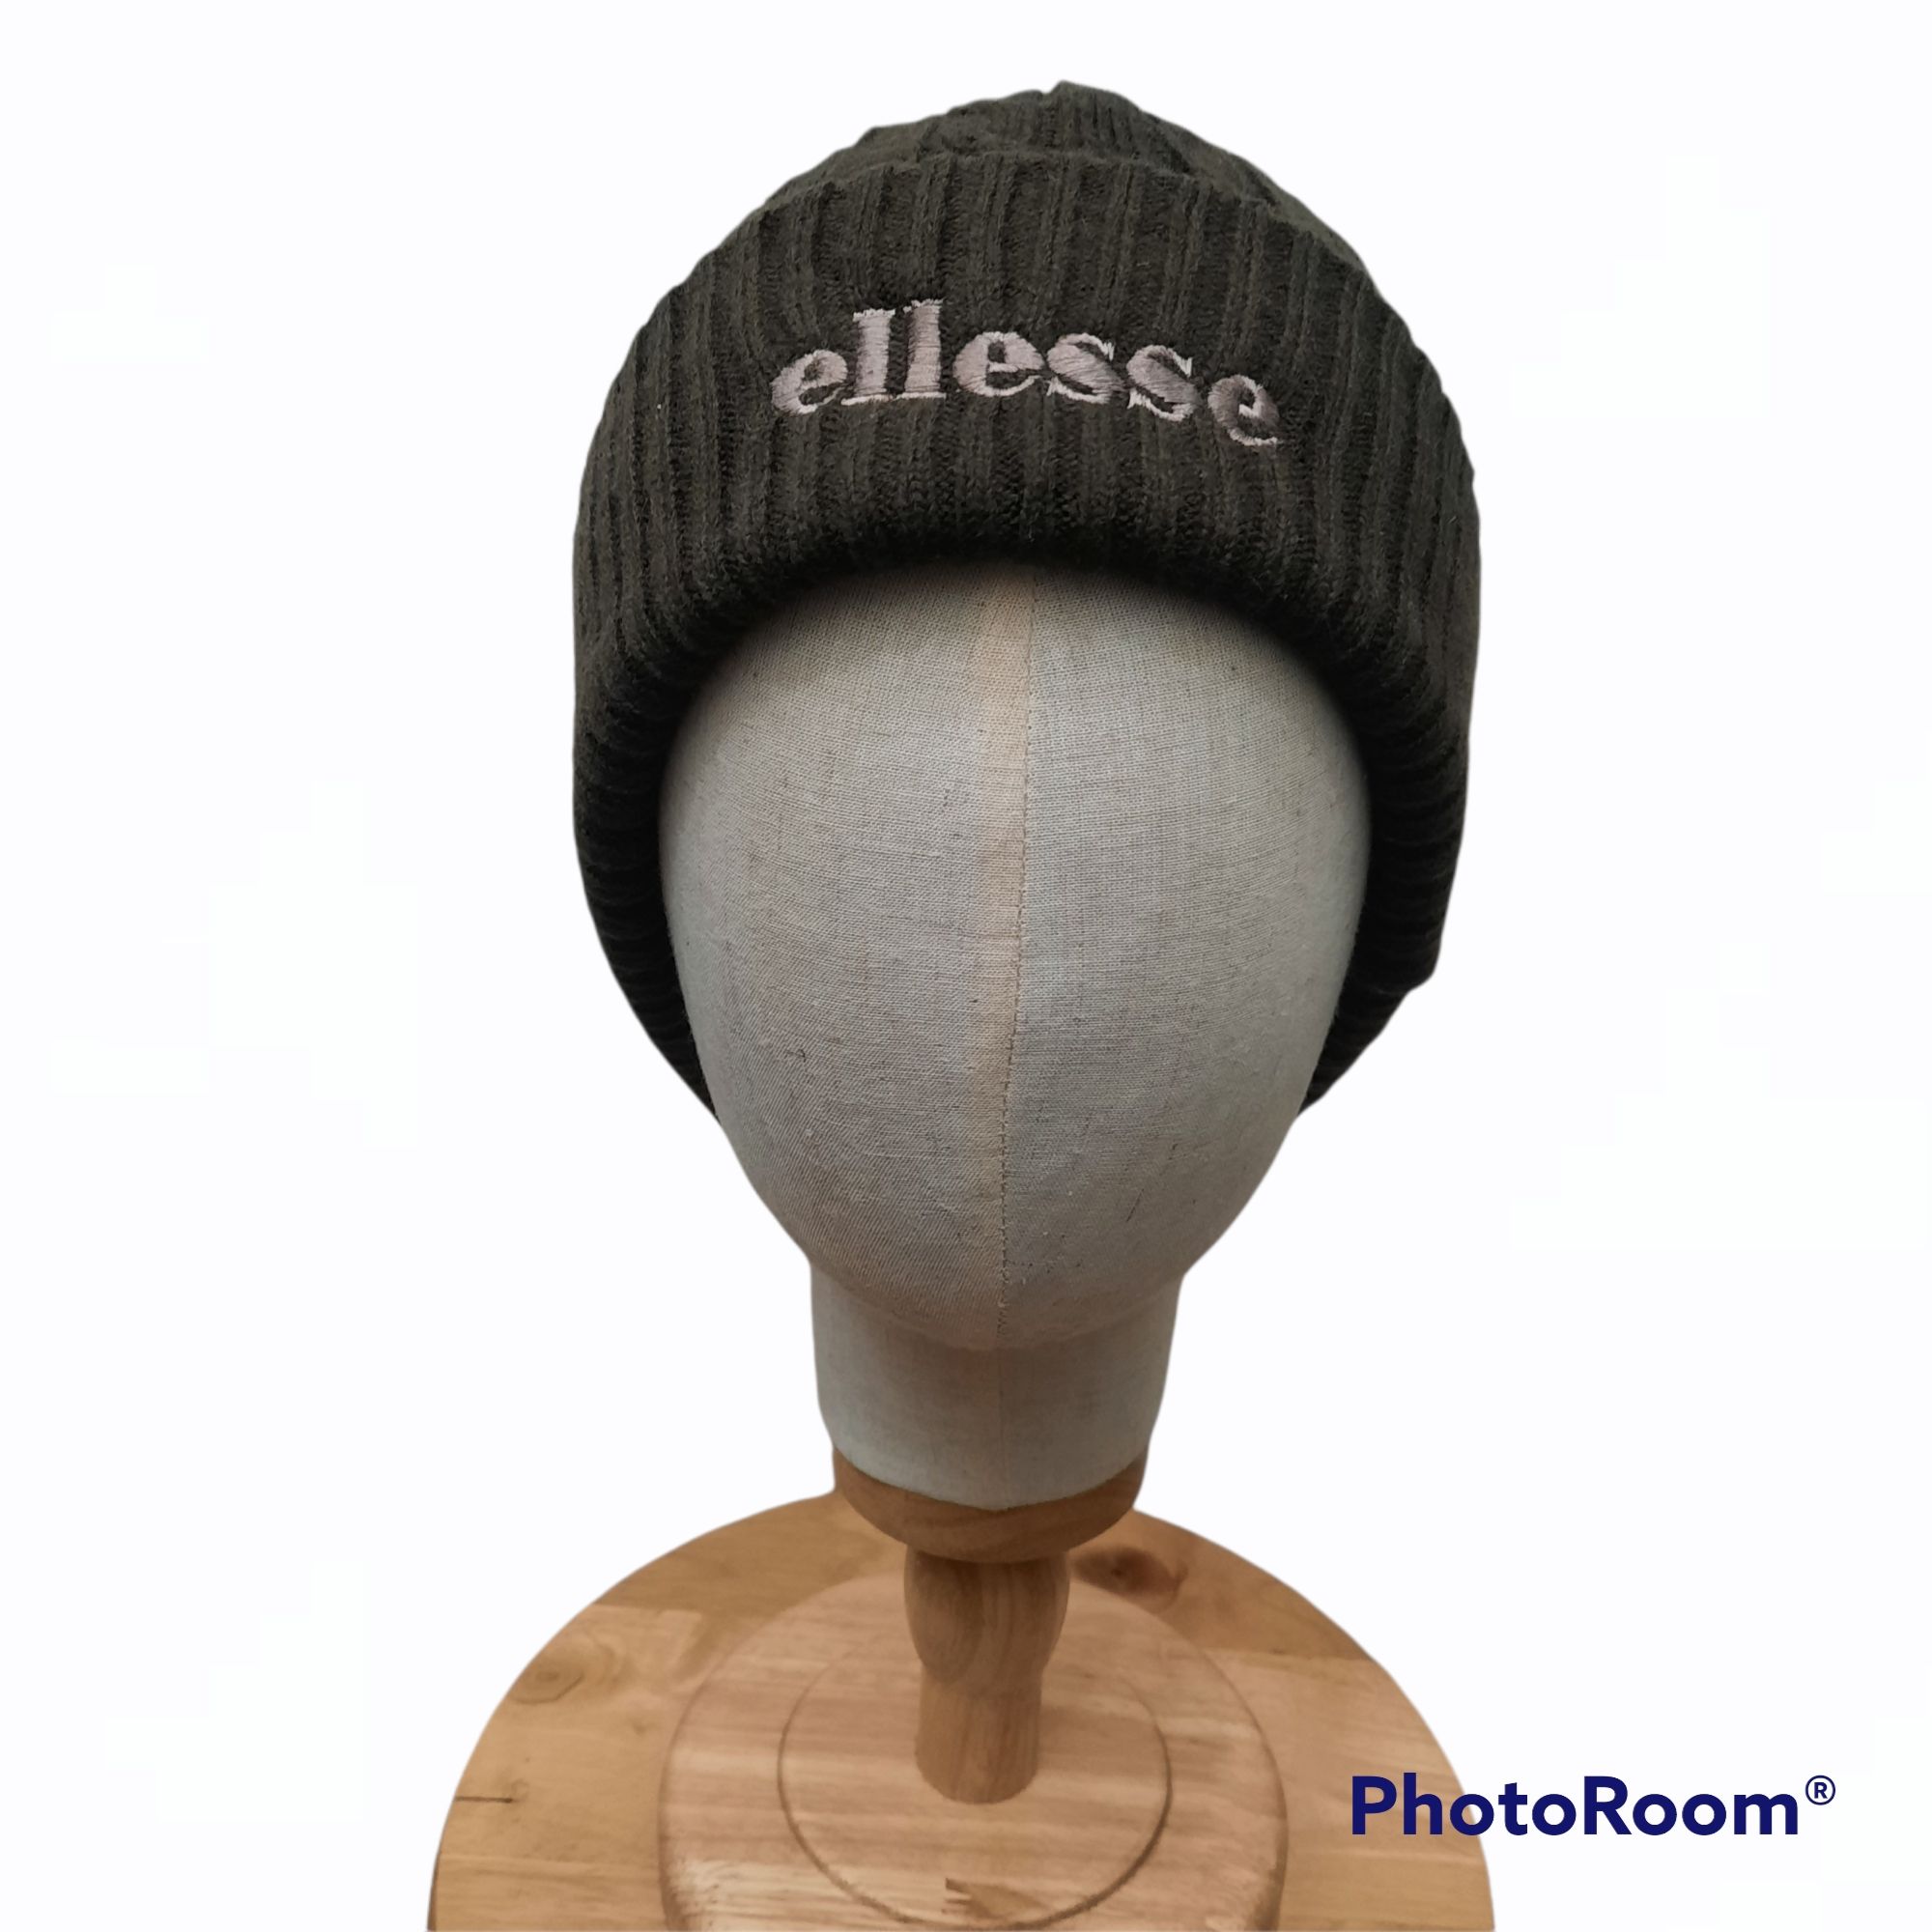 spell hat out 🔥Ellesse Grailed beanie embroidery Ellesse |